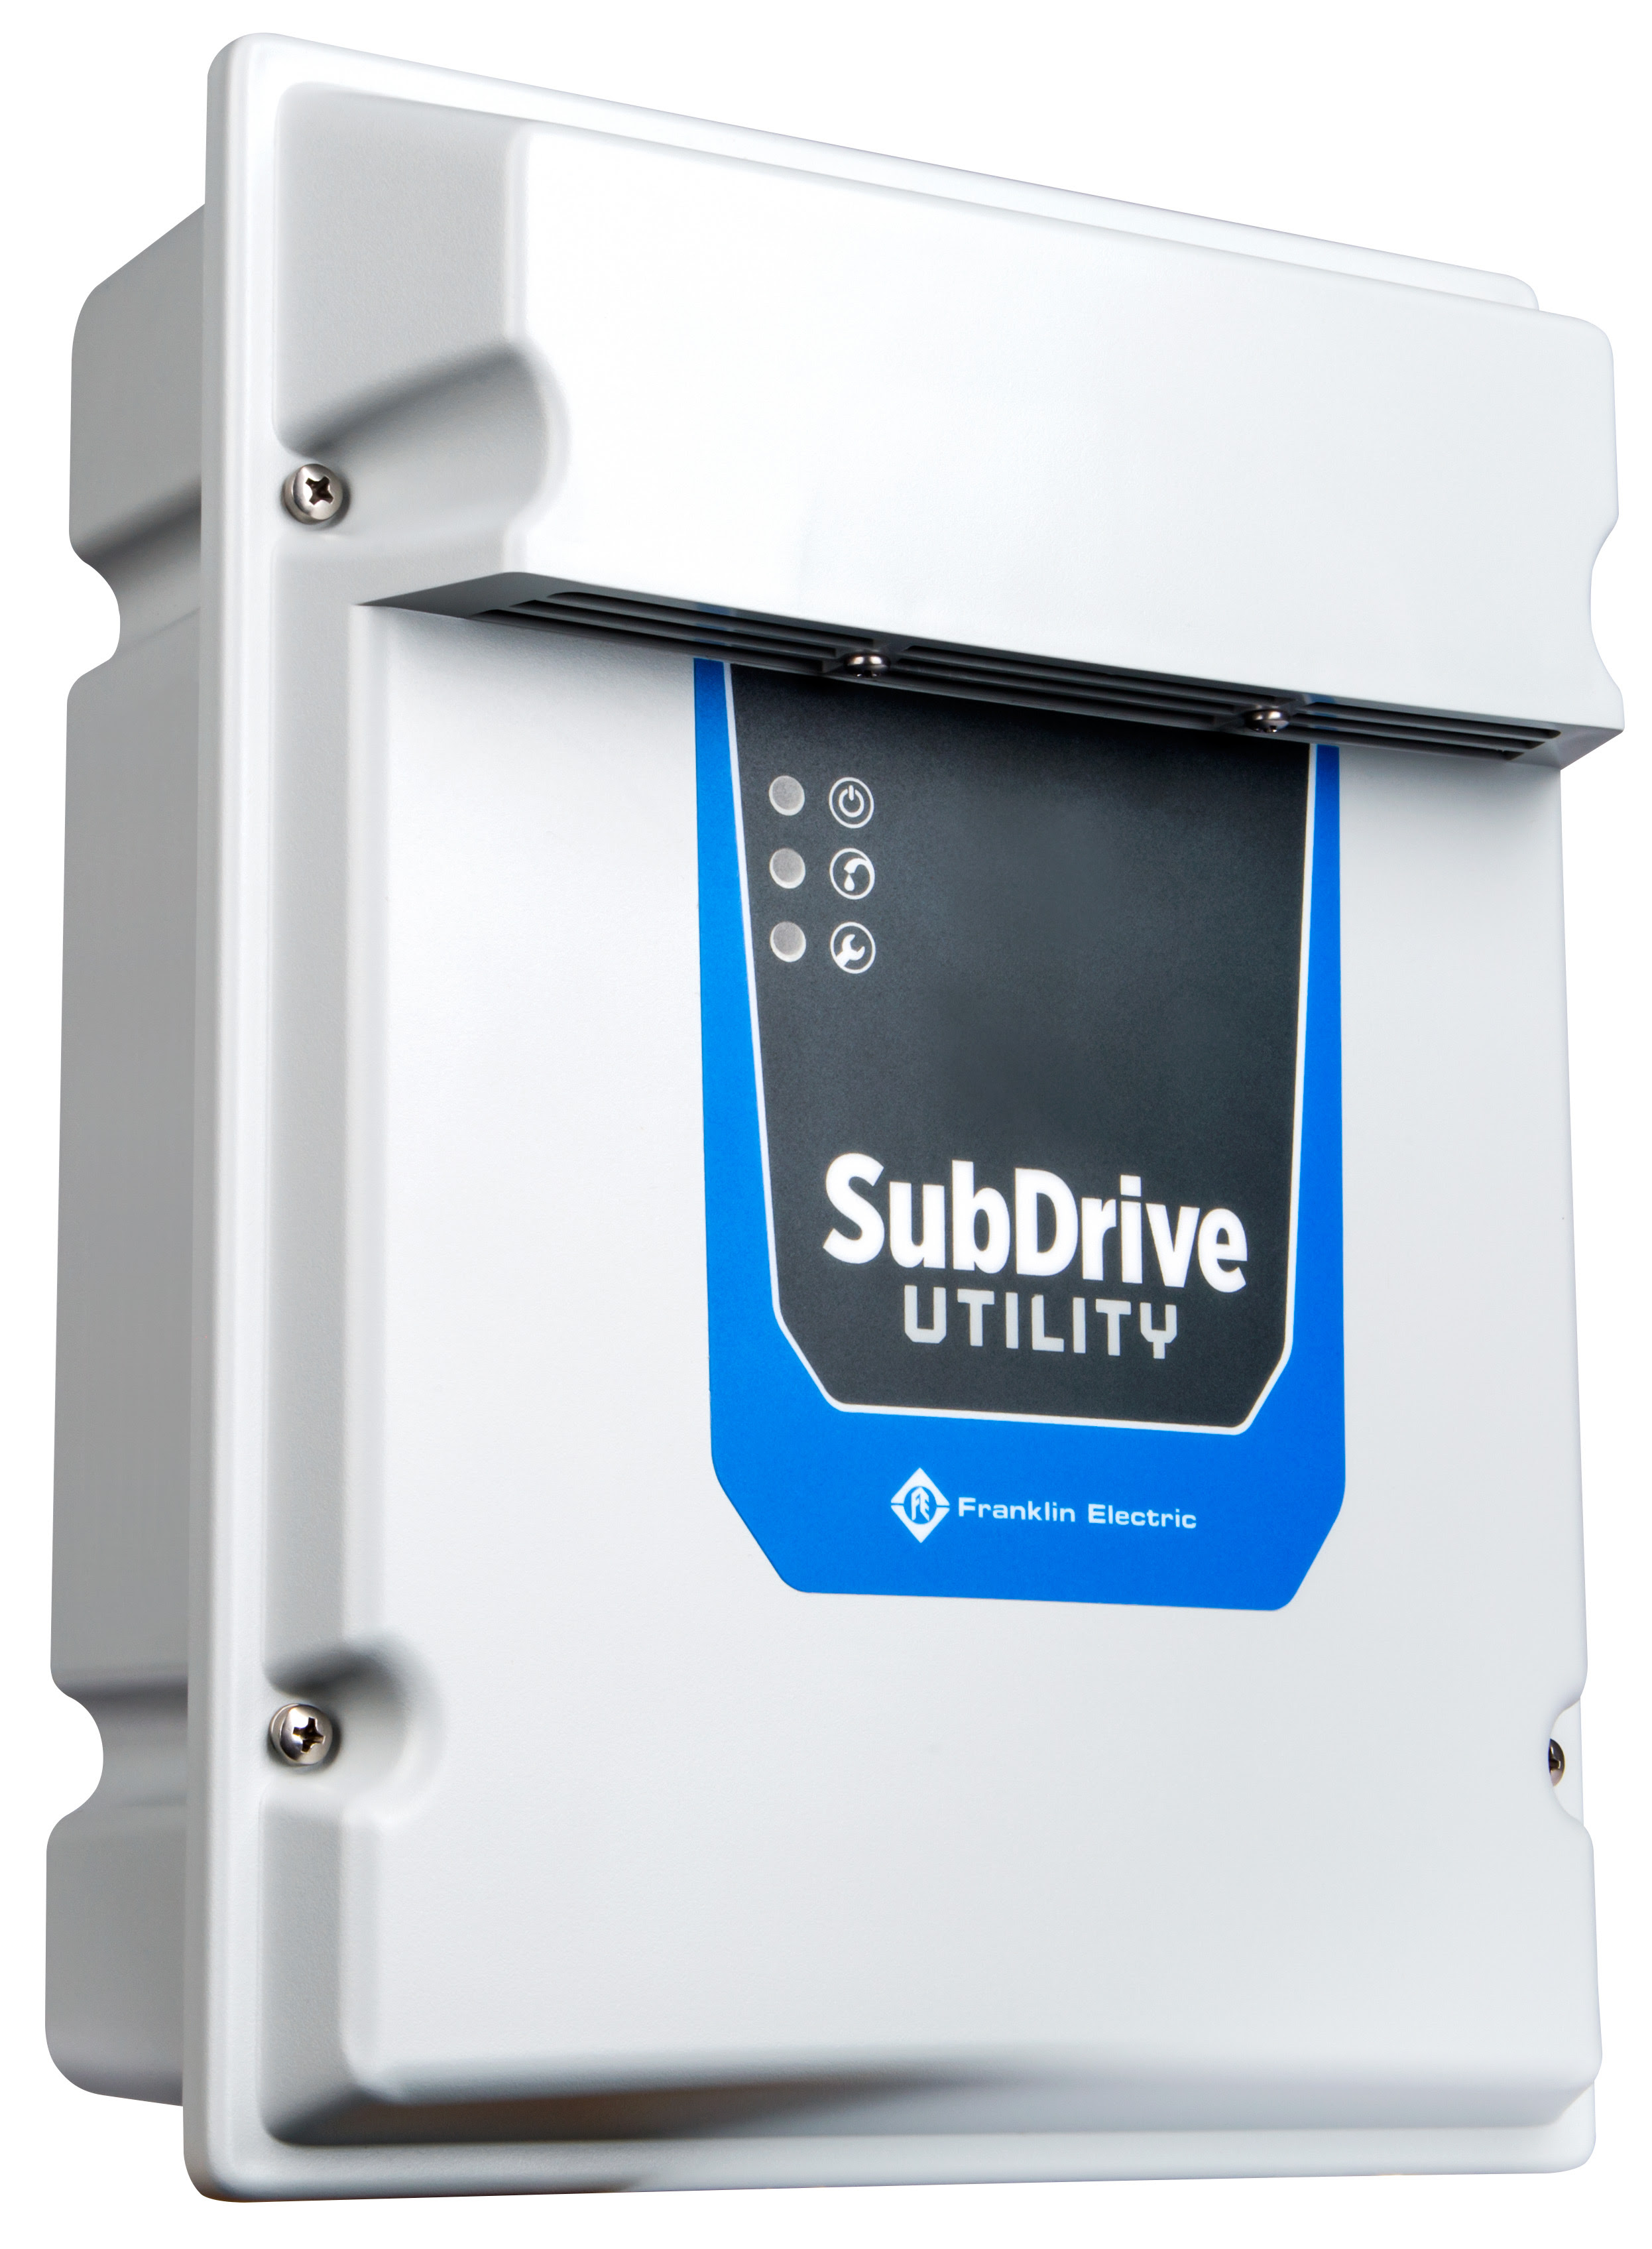 Franklin Electric has improved its SubDrive Utility variable frequency drive